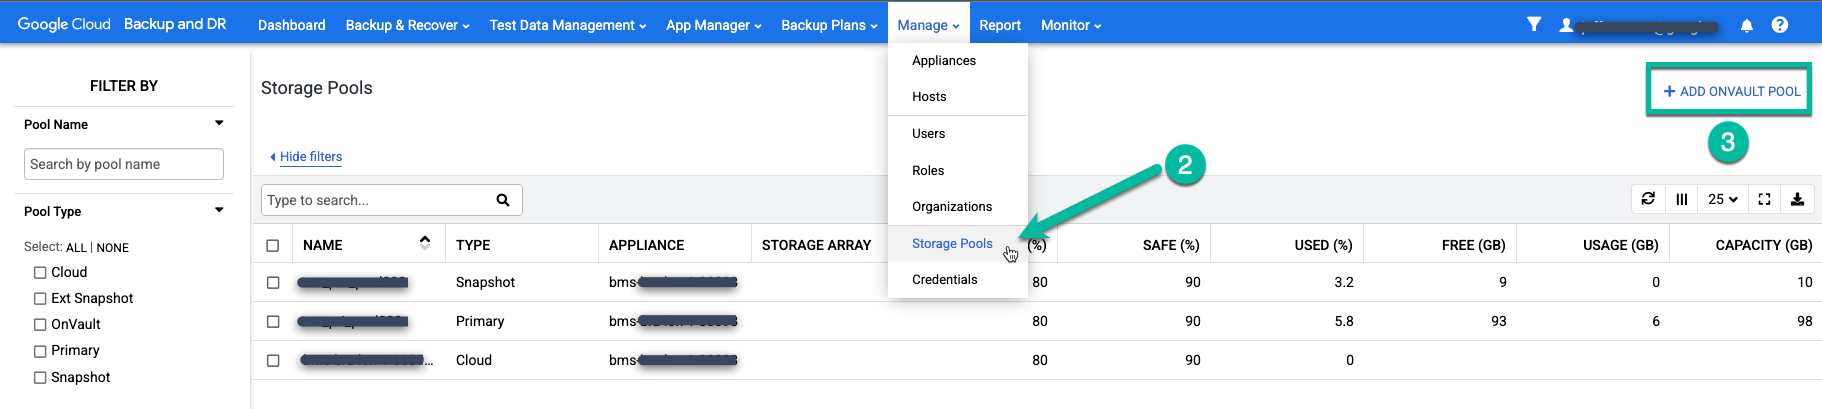 Backup and DR management console page that shows the Manage > Storage Pools menu.